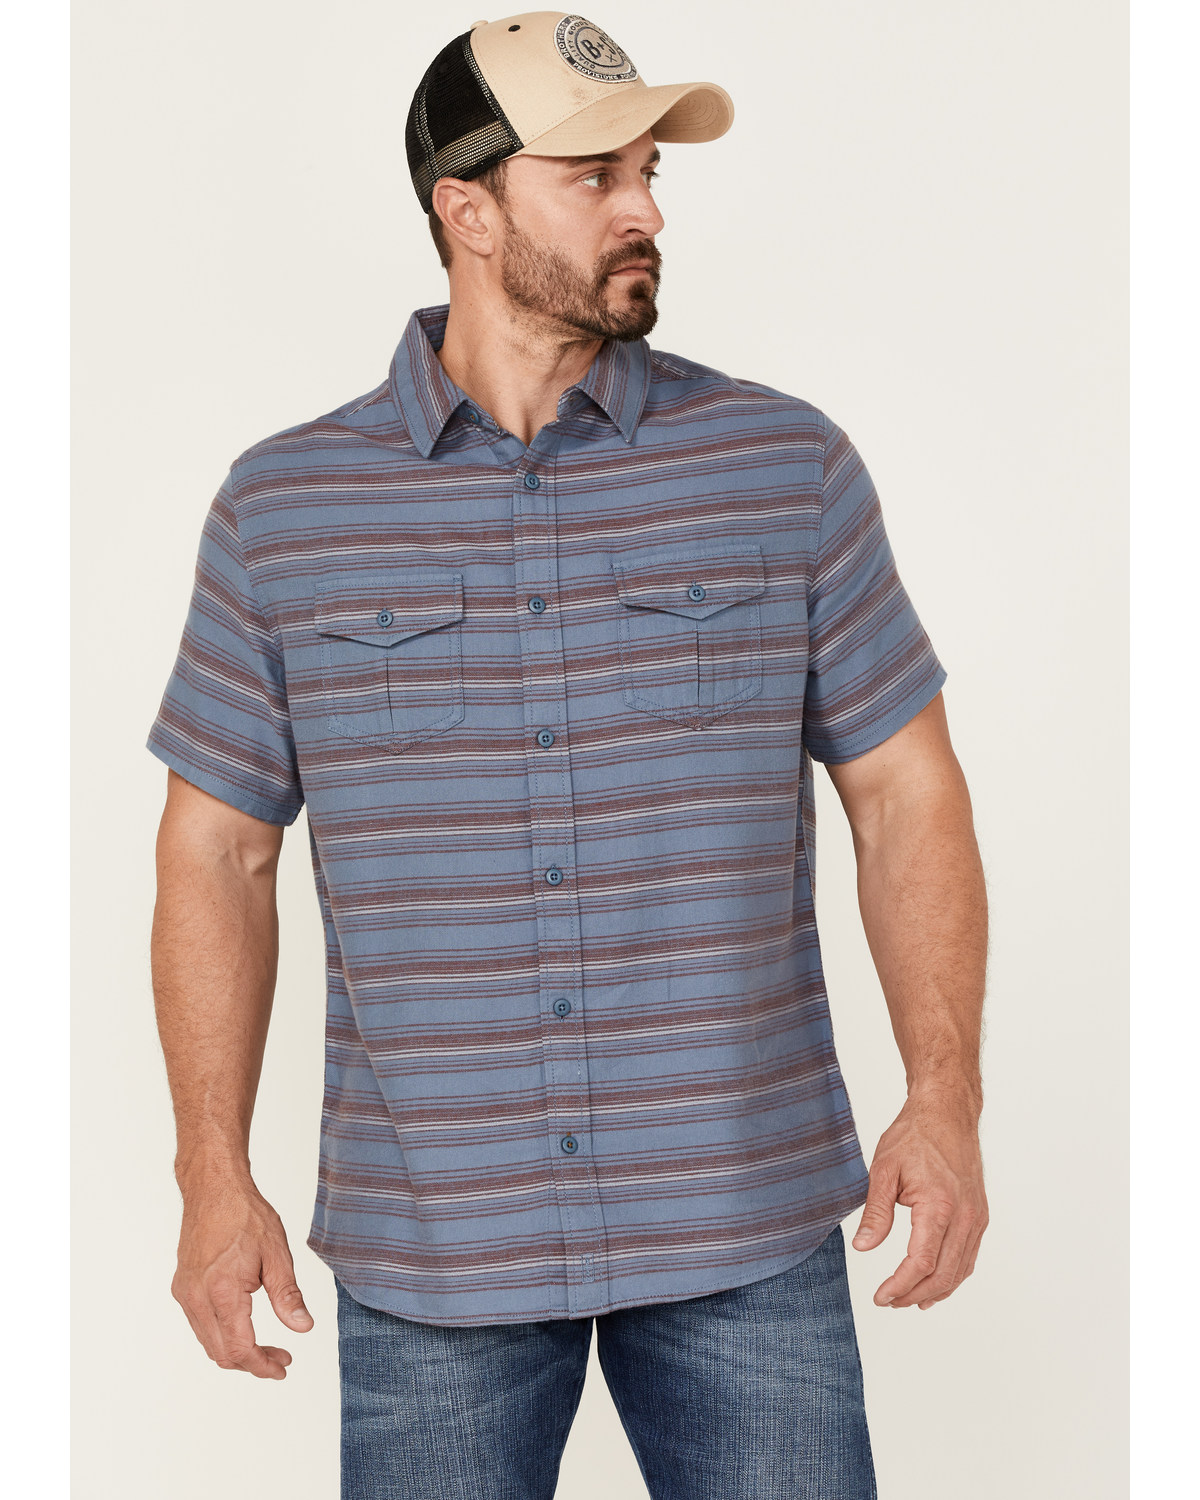 Brothers and Sons Men's Striped Short Sleeve Button Down Western Shirt